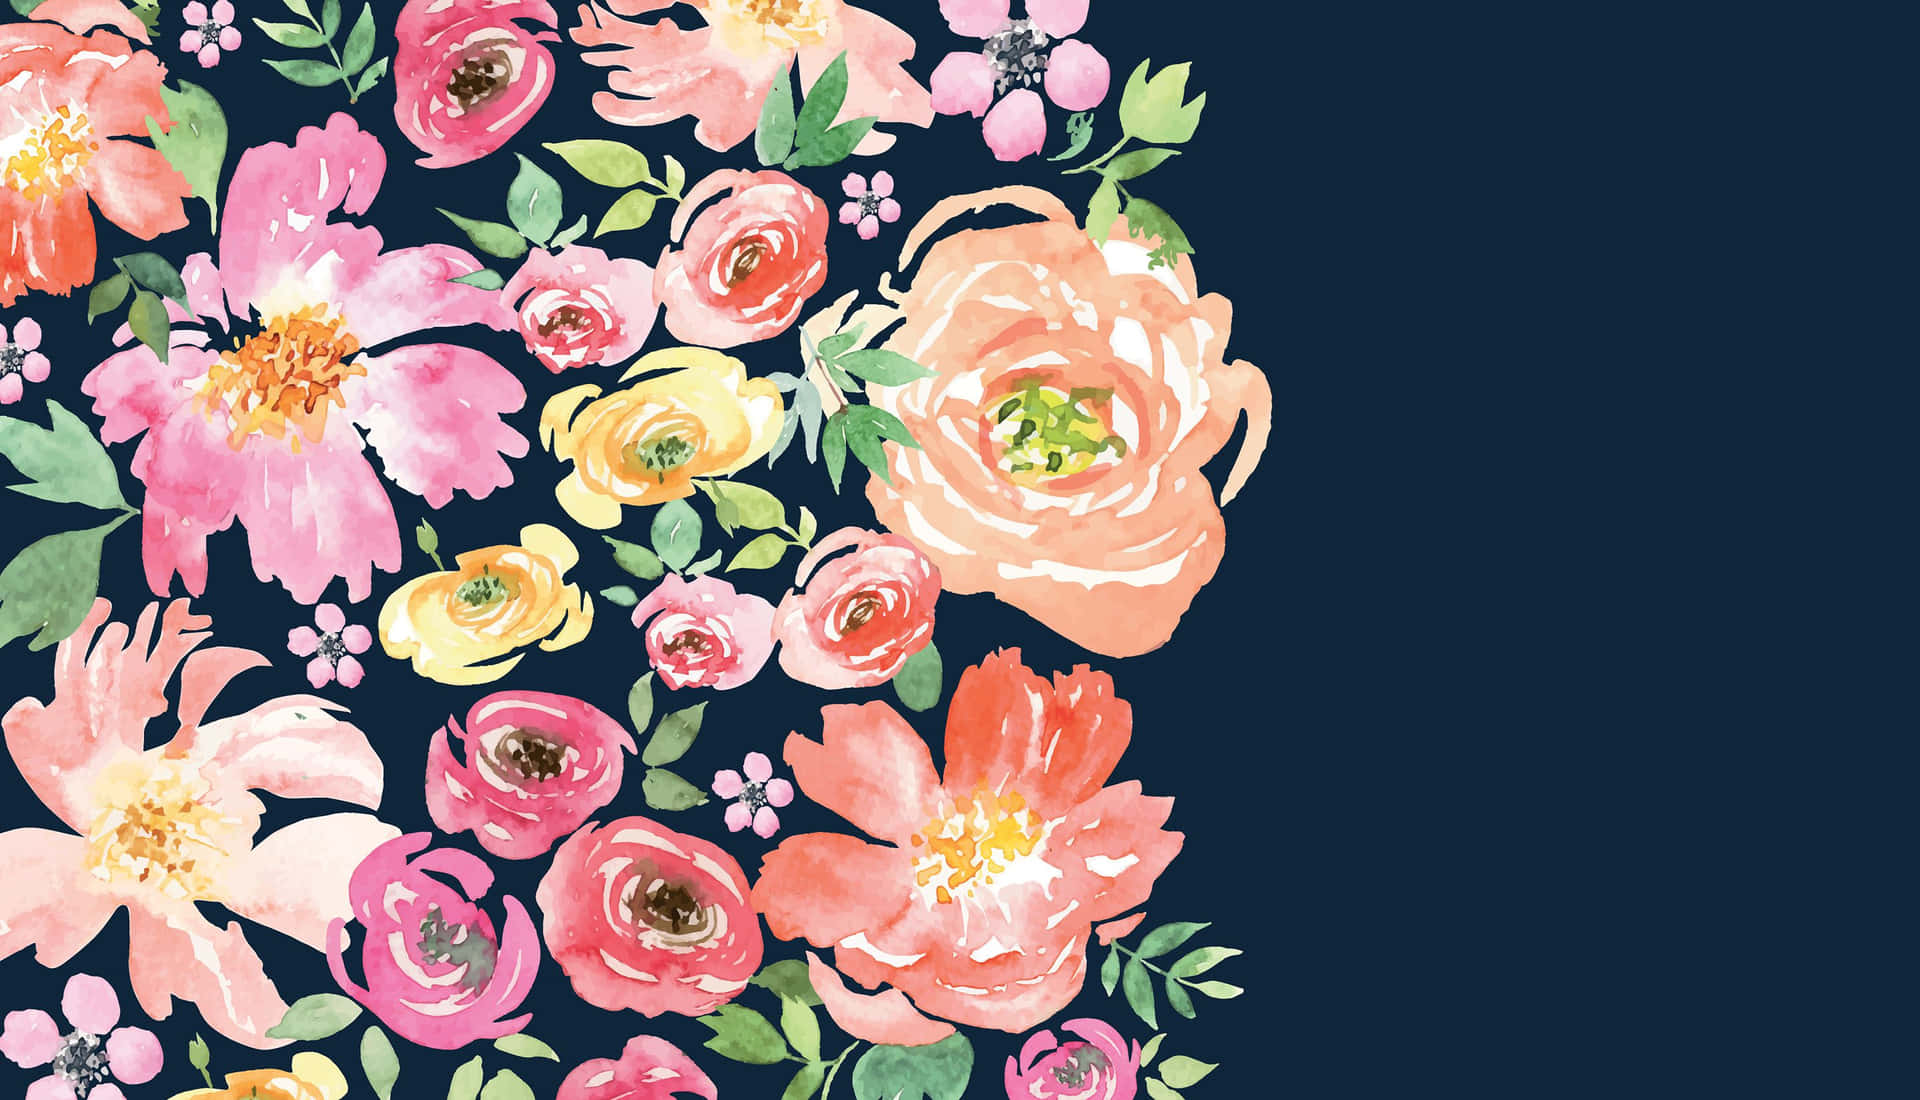 A Watercolor Floral Border On A Navy Background Wallpaper